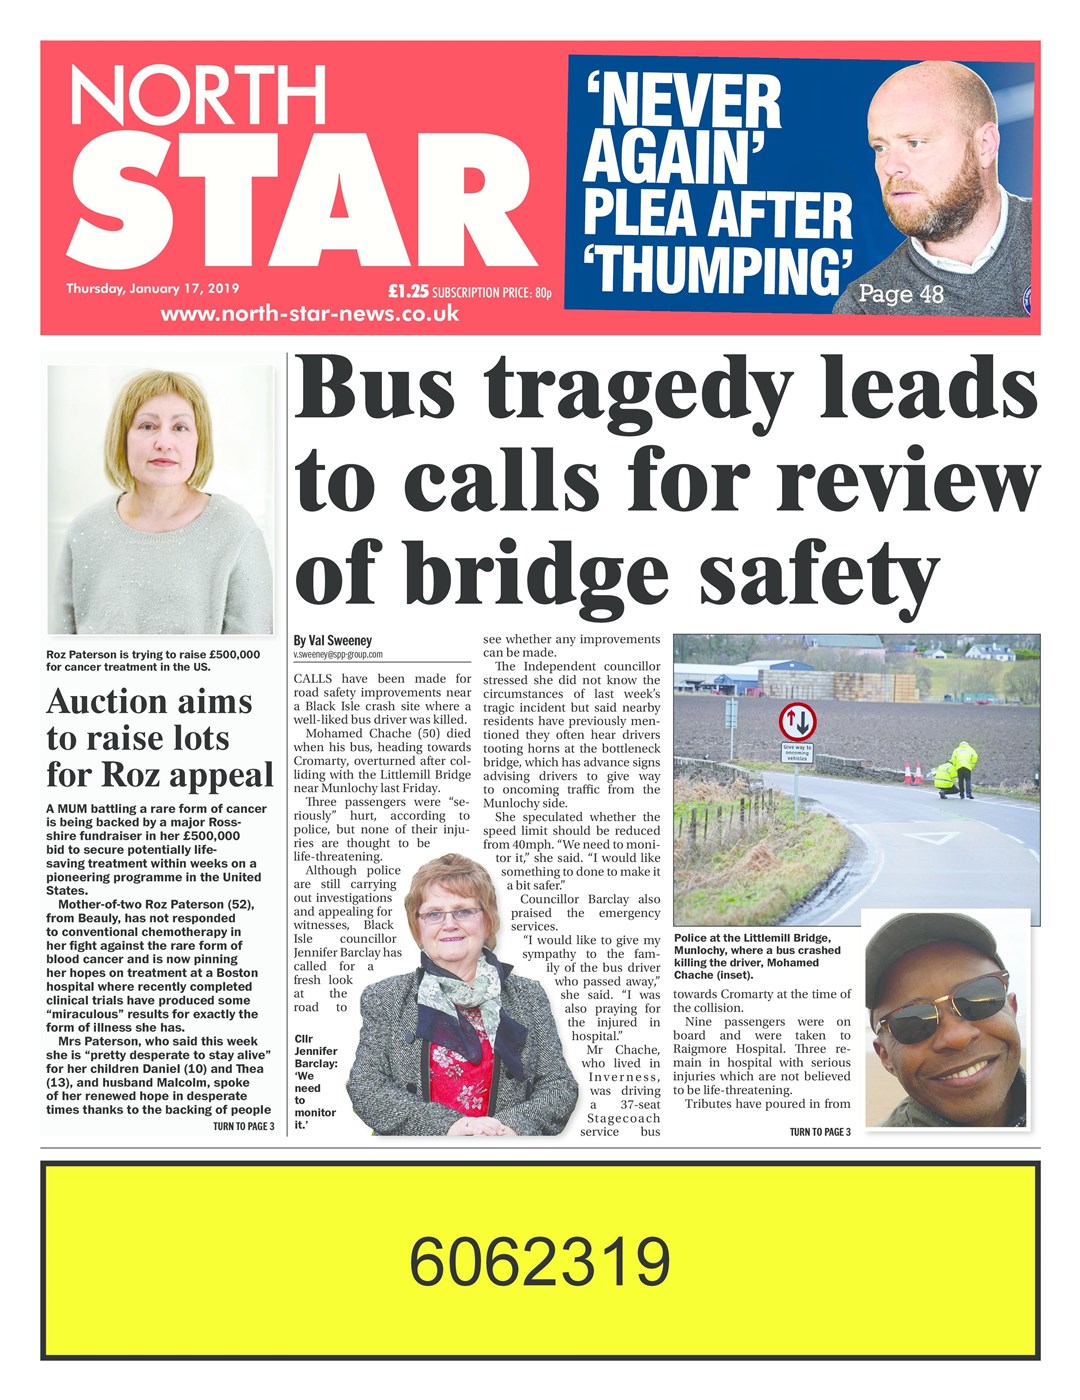 Tragedy: The bridge was scene of a fatality earlier this year.